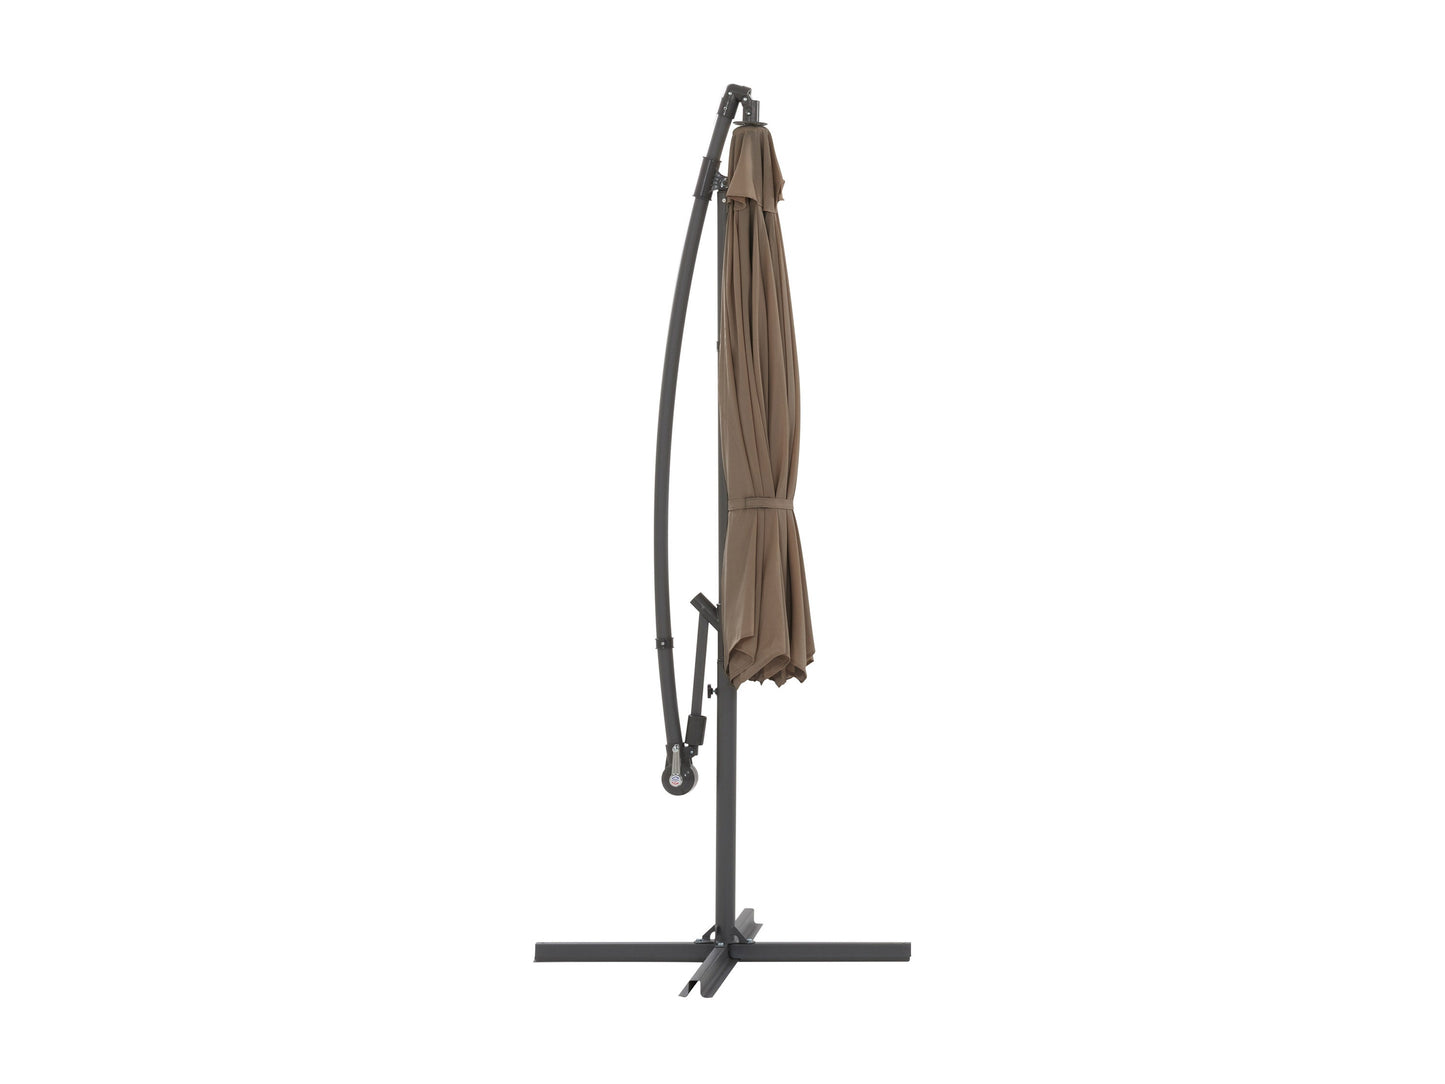 sandy brown offset patio umbrella 400 Series product image CorLiving#color_sandy-brown